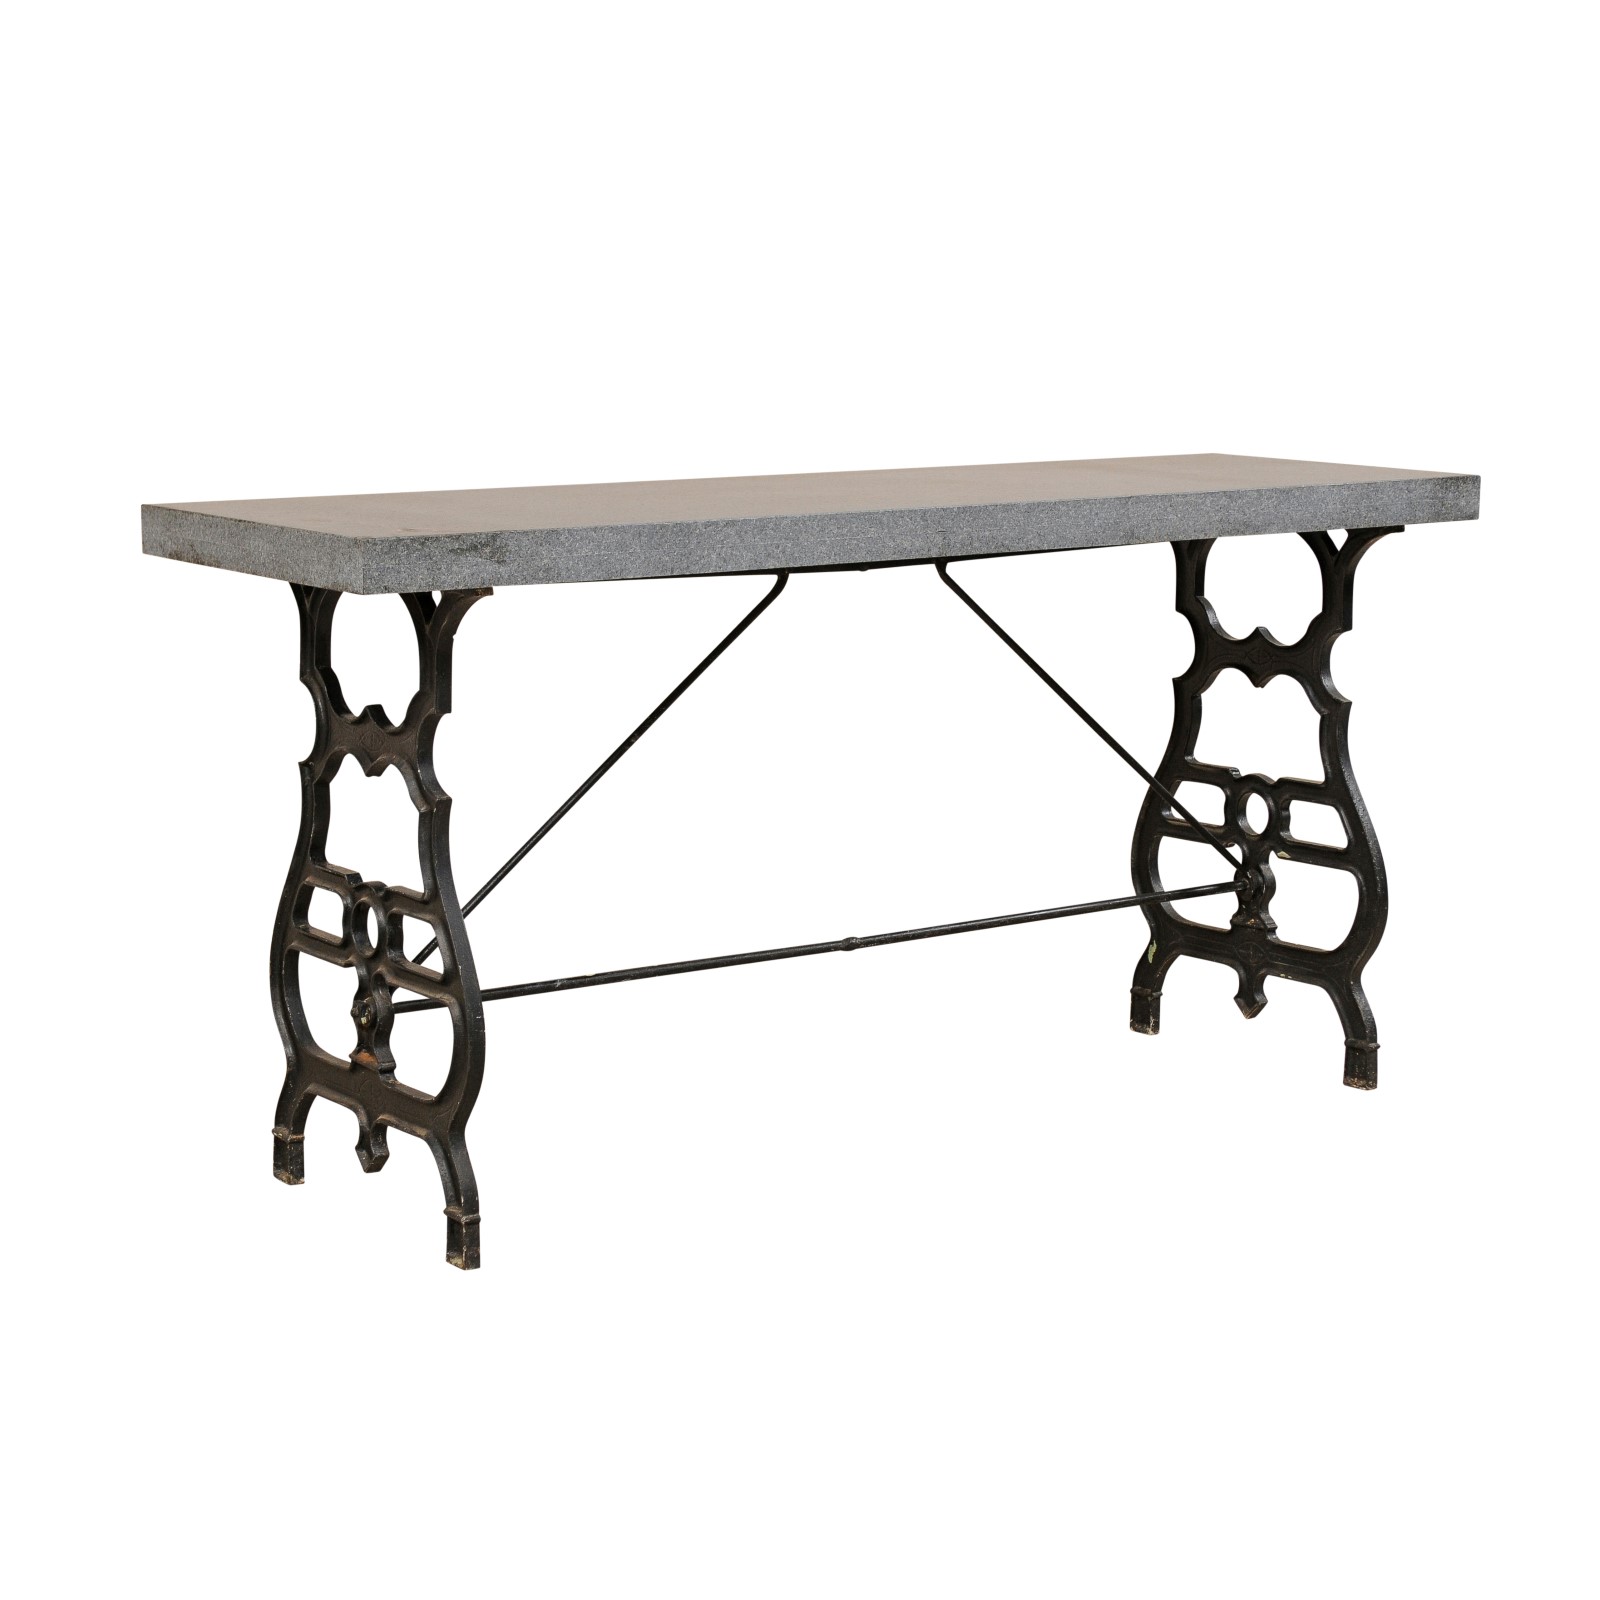 French Honed Granite & Iron Table